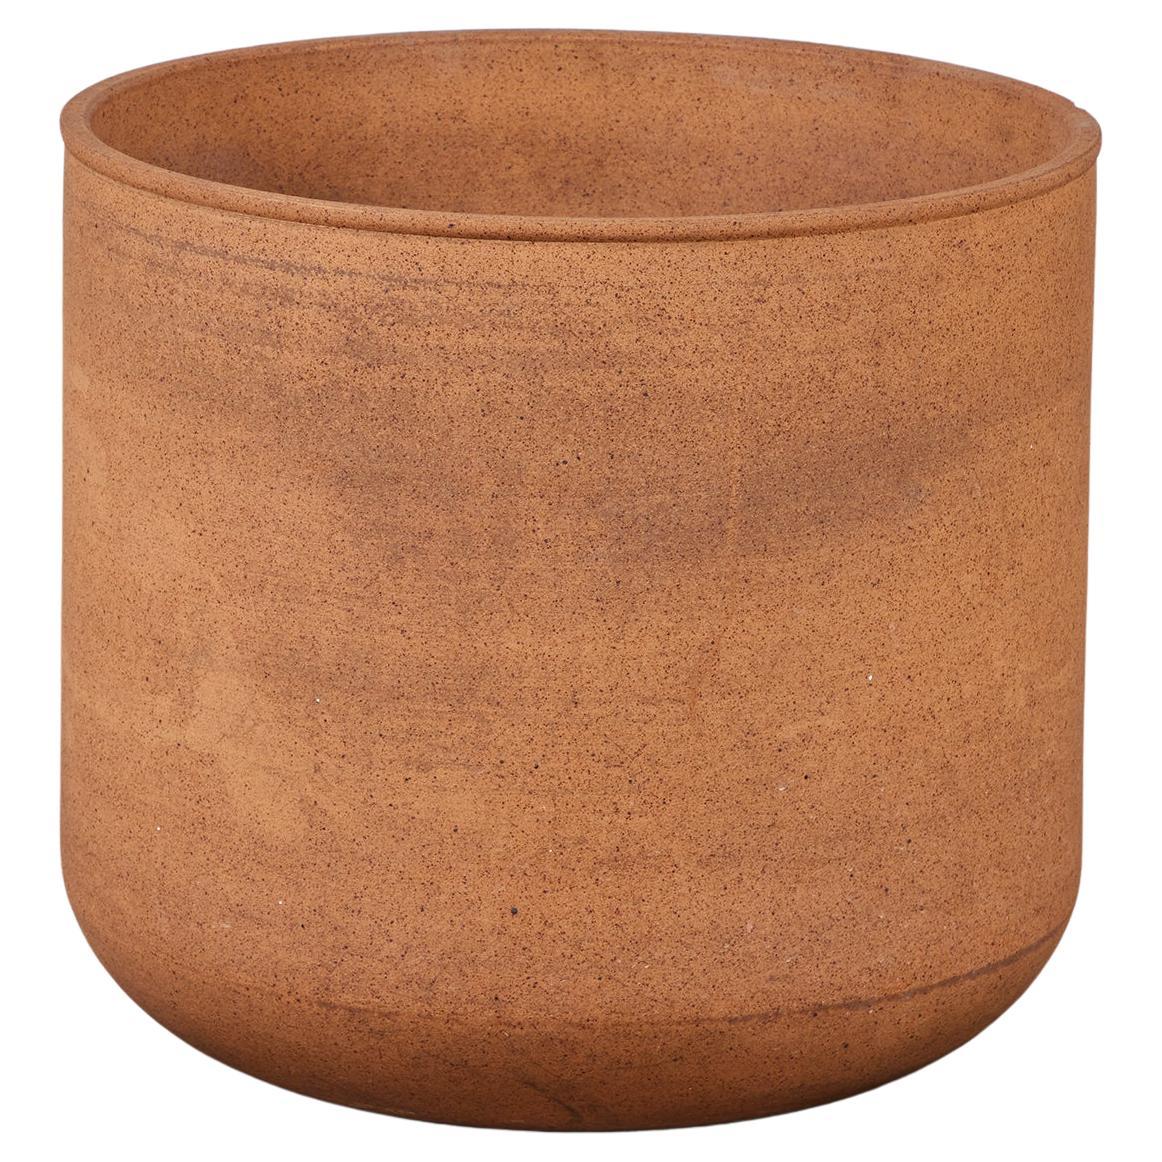 Malcolm Leland Stoneware Planter for Architectural Pottery